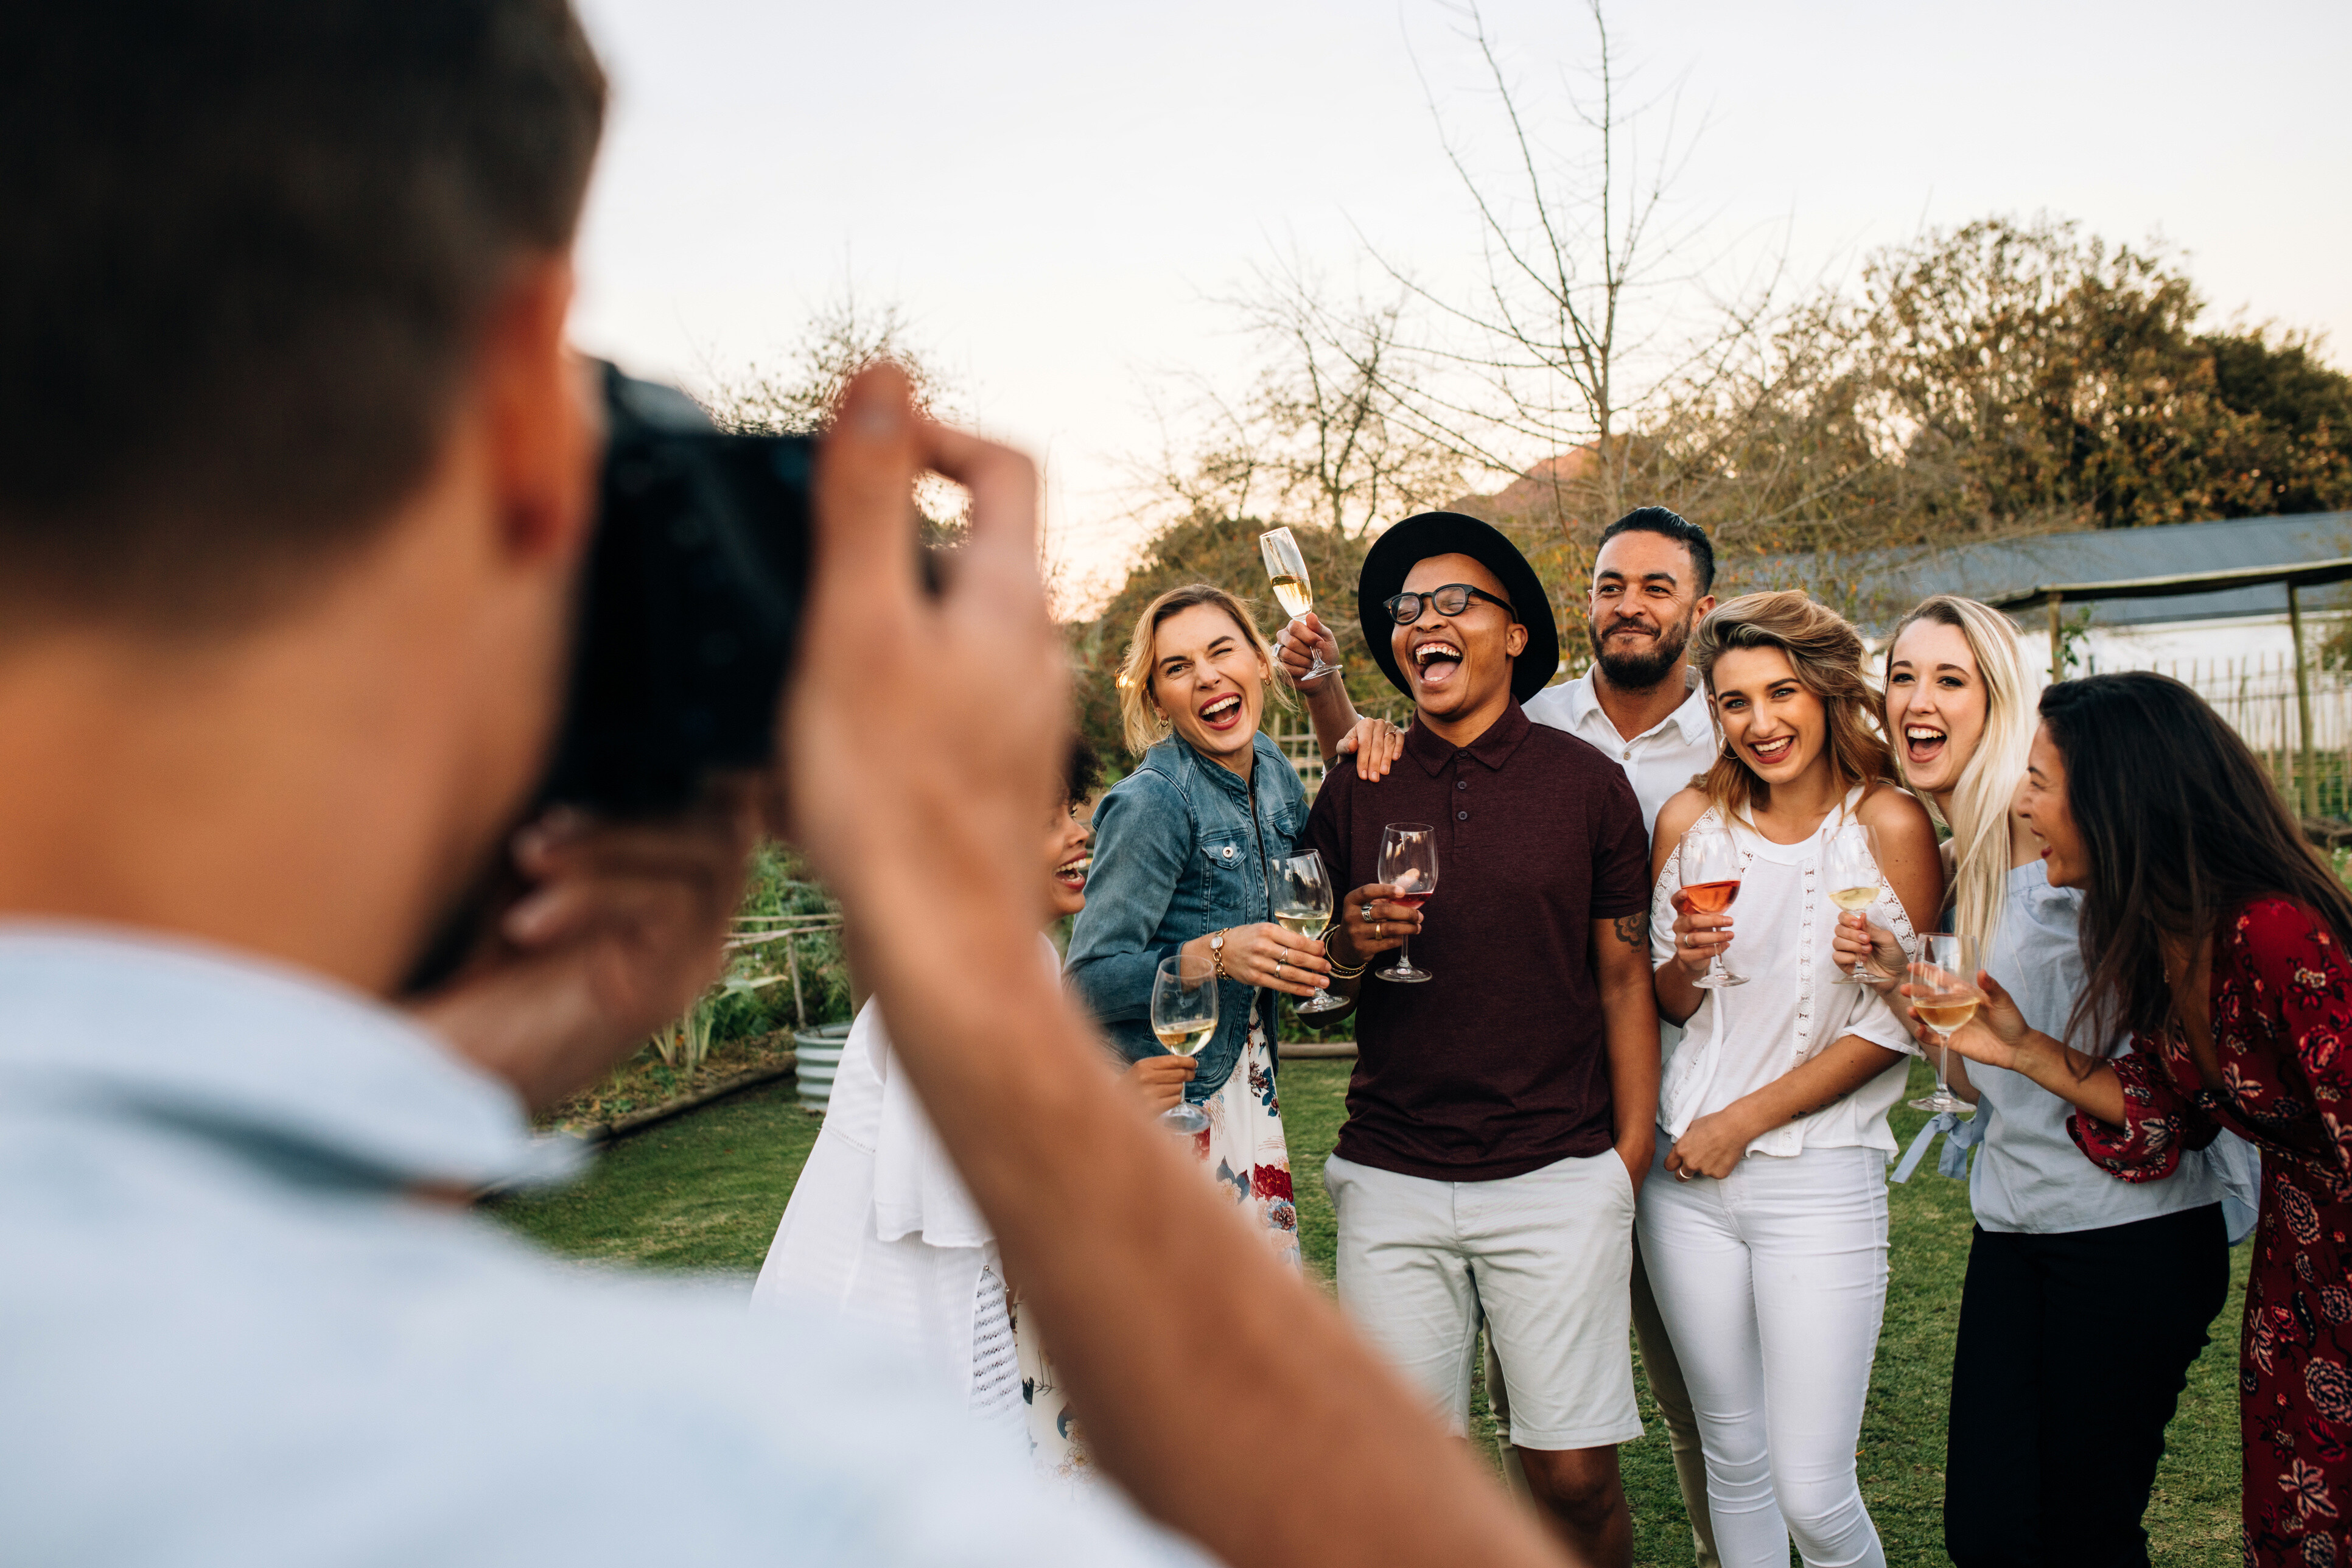 An event photographer taking a picture of a diverse group of people during an event at a garden.